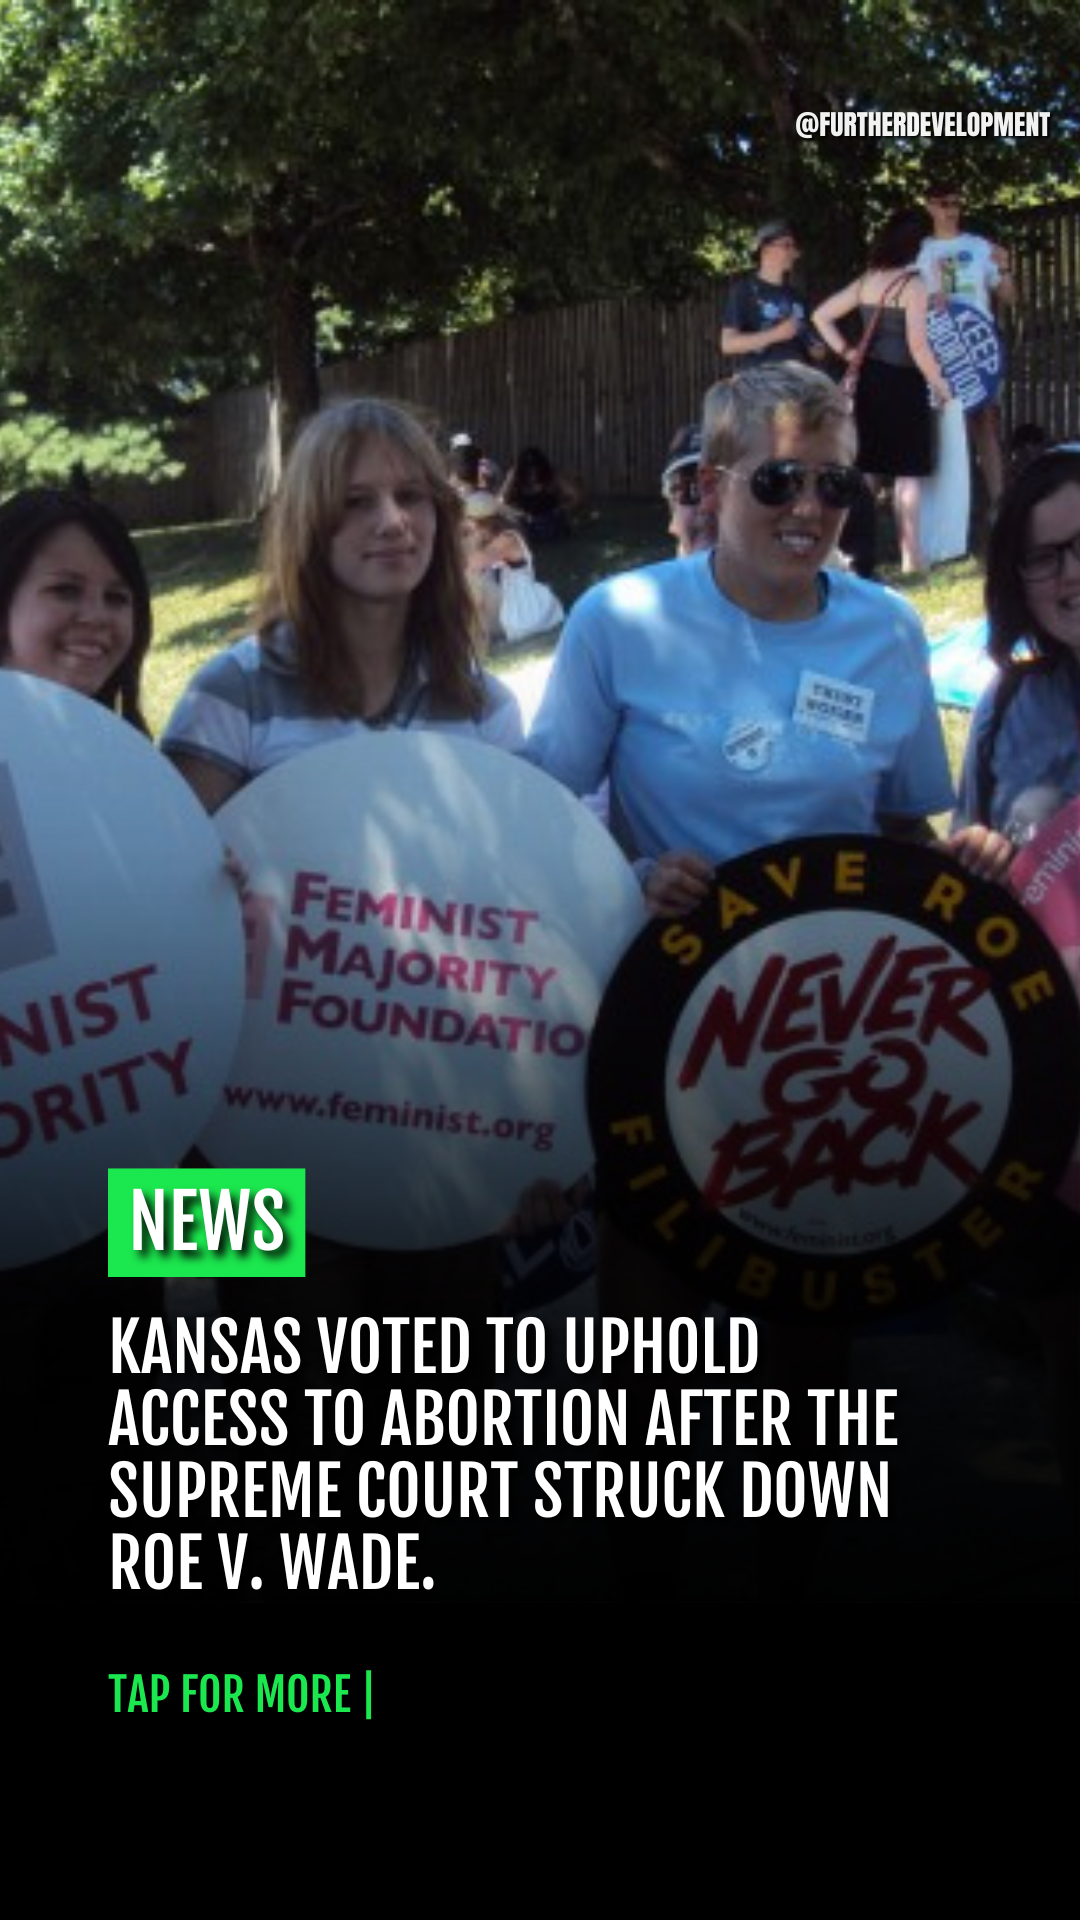 Kansas voted to uphold access to abortion after the Supreme Court struck down Roe v. Wade.